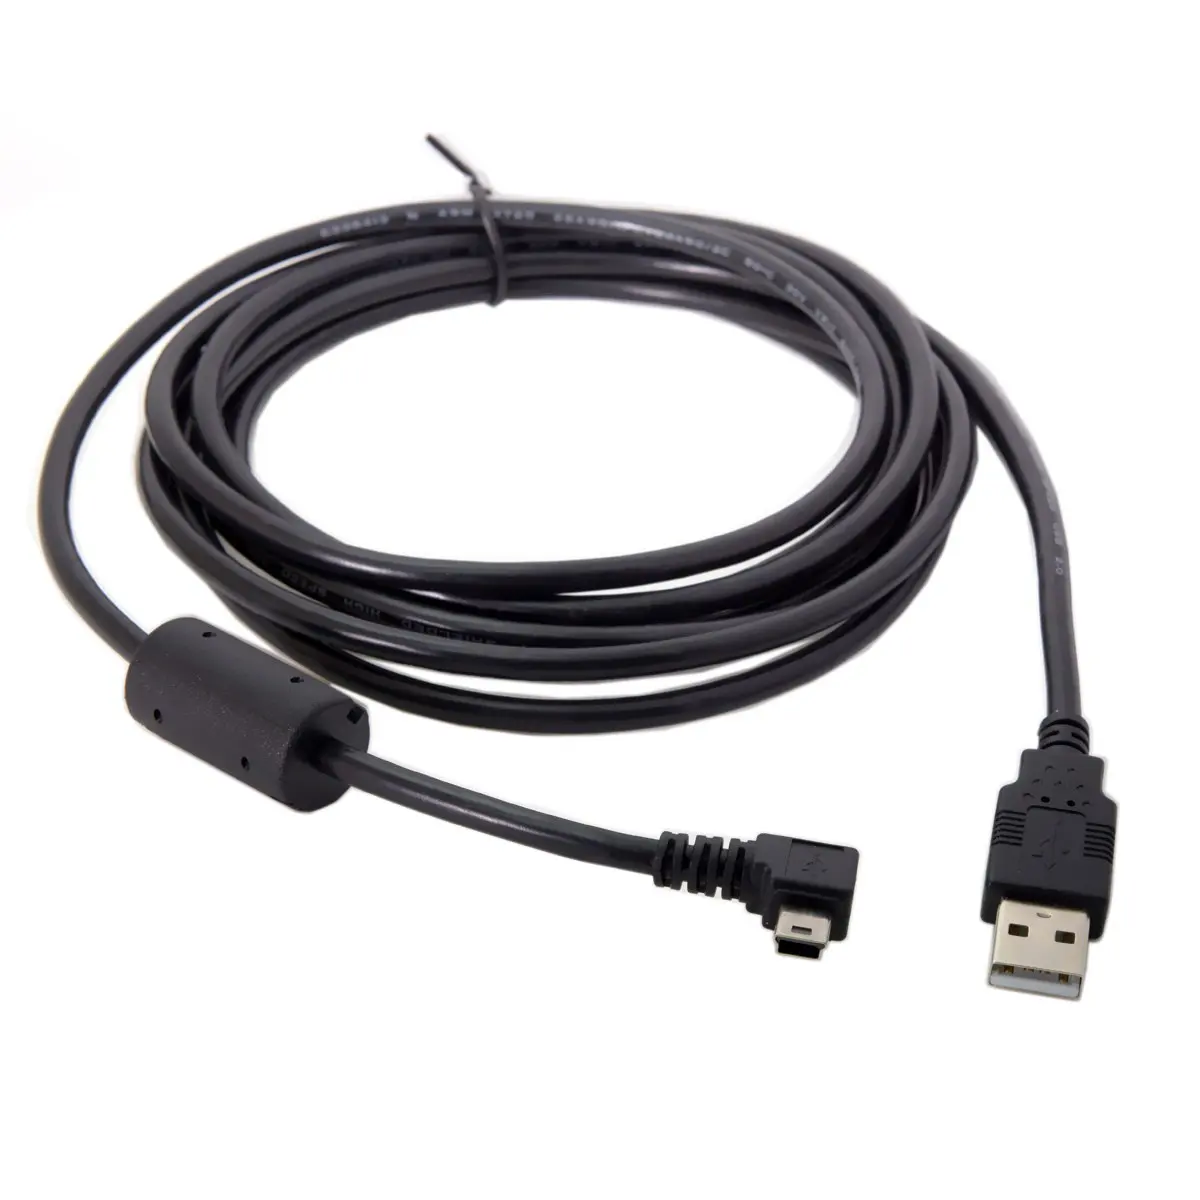 

Mini USB B Type 5pin Male to USB 2.0 Male Data Cable with Ferrite 0.5m 1.8m 3.0m 5.0m Left Angled Right angled 90 Degree